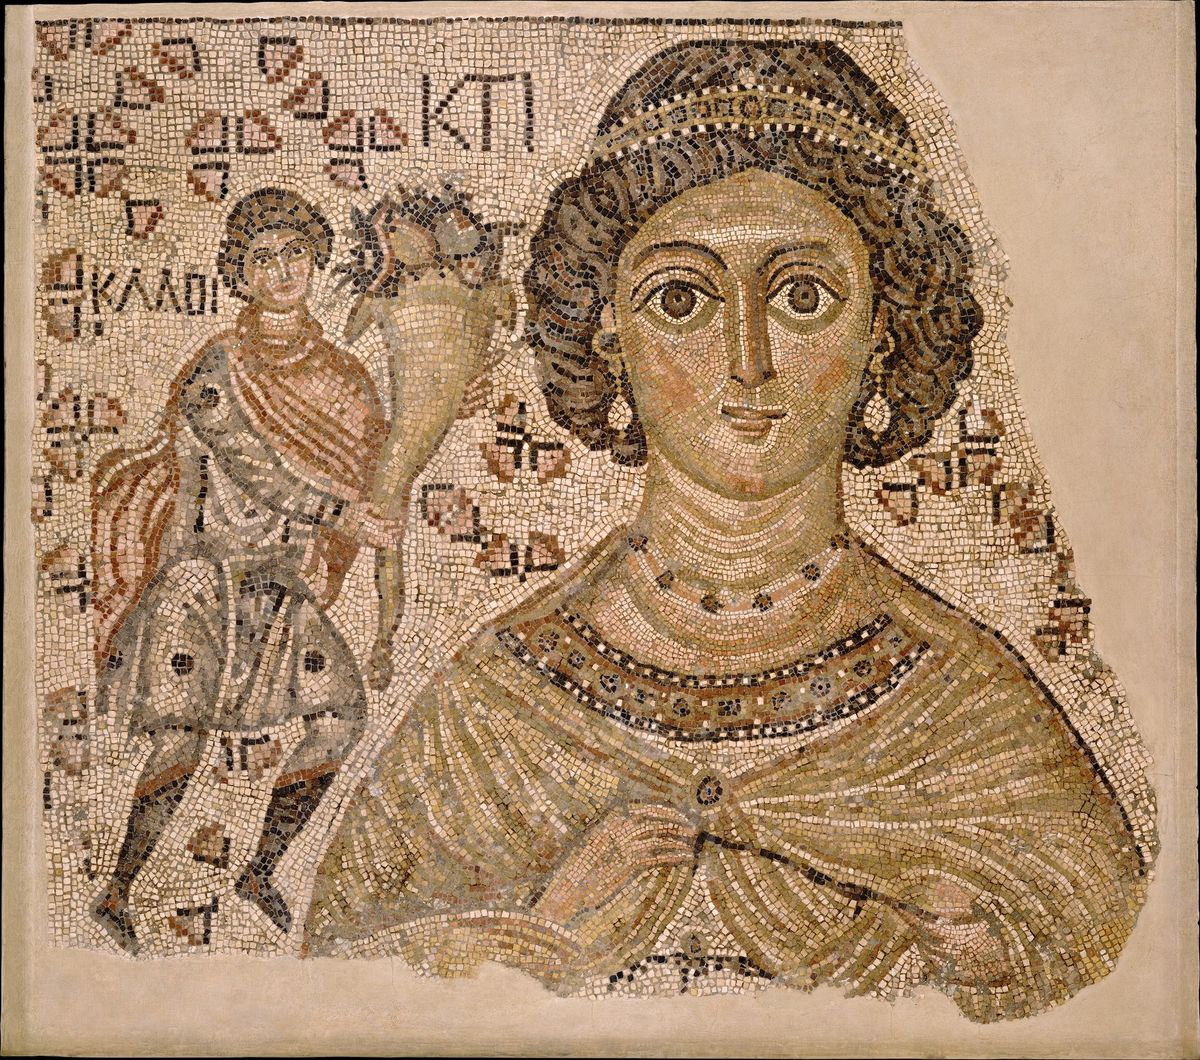 A Roman mosaic from 500-550 CE currently held in the Metropolitan Museum's collection, with its provenance beginning in the 1970s with George Lotfi. According to the New York investigator's affadavit, the piece, broken in two fragments, Lotfi sold it to the late collector George Ortiz in the 1970s and its two pieces were purchased by the Metropolitan Museum in 1998 and 1999. Public domain, via the Metropolitan Museum.